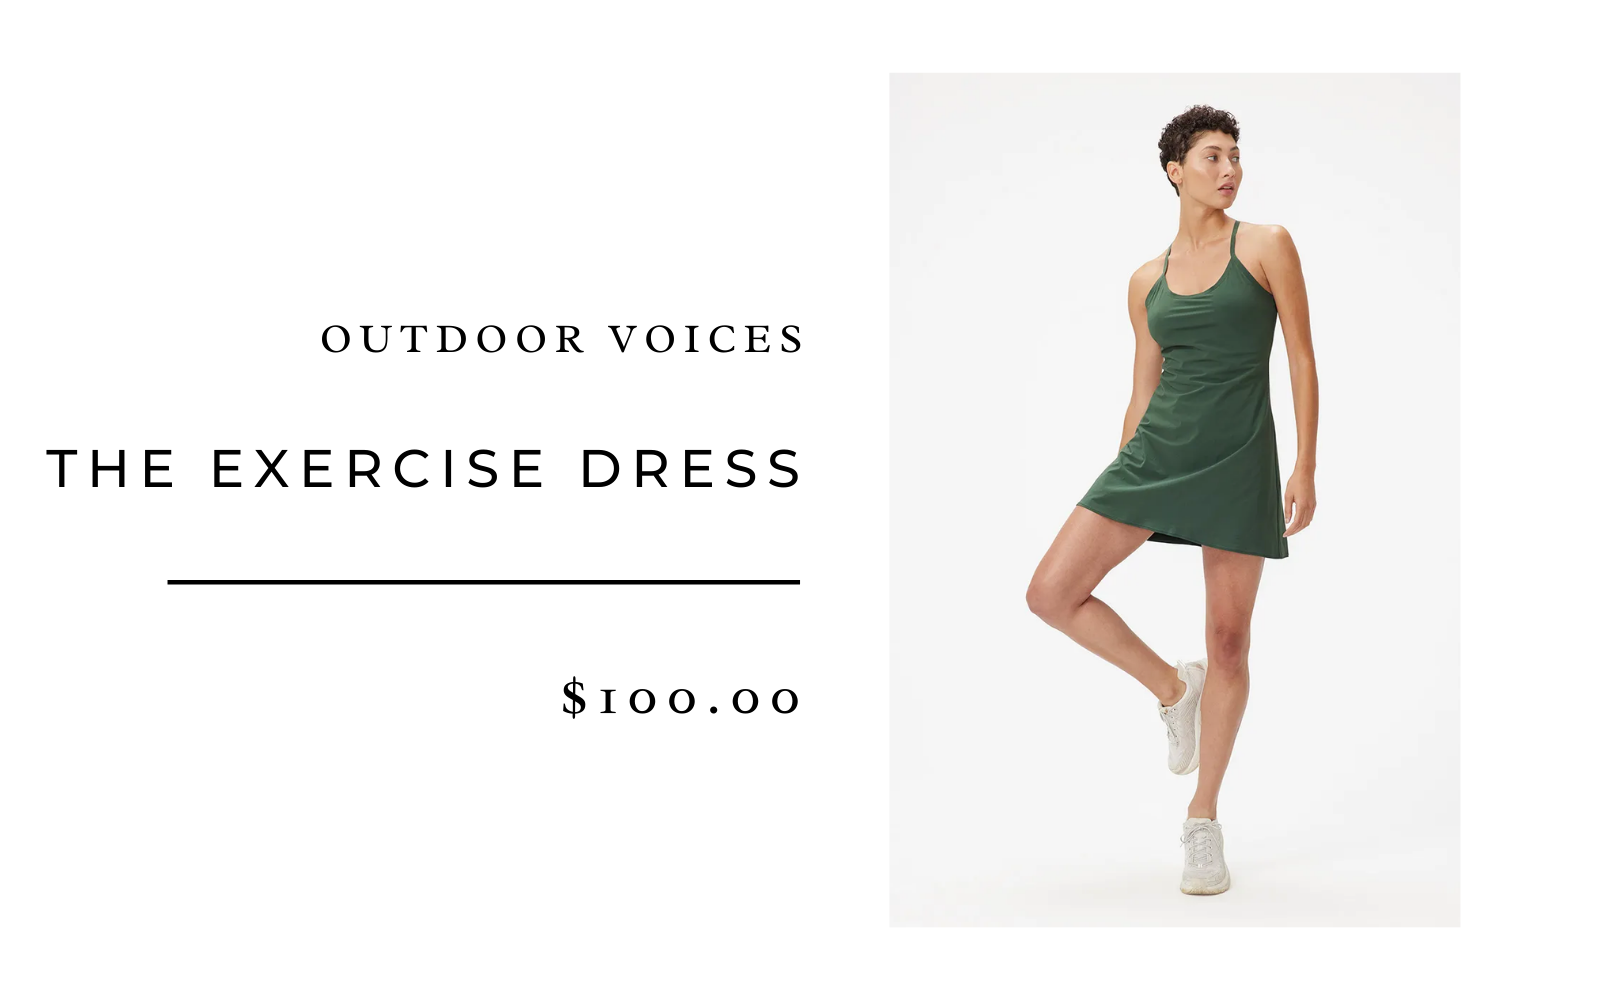 Outdoor Voices - “I can attest that The Exercise Dress is